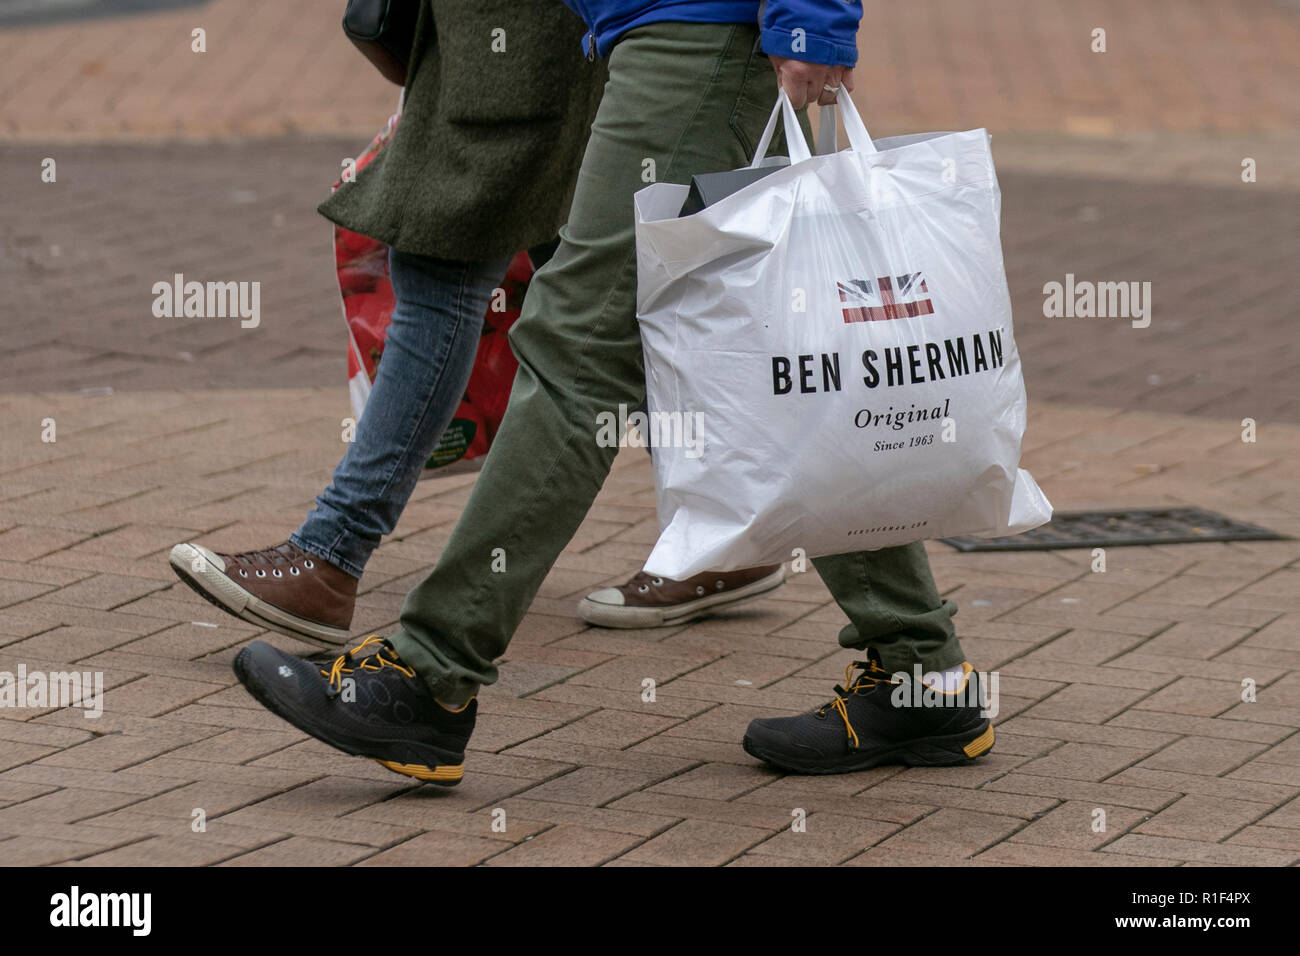 Blackpool, Lancashire, UK. 10th Nov, 2018. Ben Sherman Original, a clothing  brand selling shirts, sweaters, suits, outerwear, and shoes; Shoppers,  shopping and shops on a busy Christmas shopping day in the resort